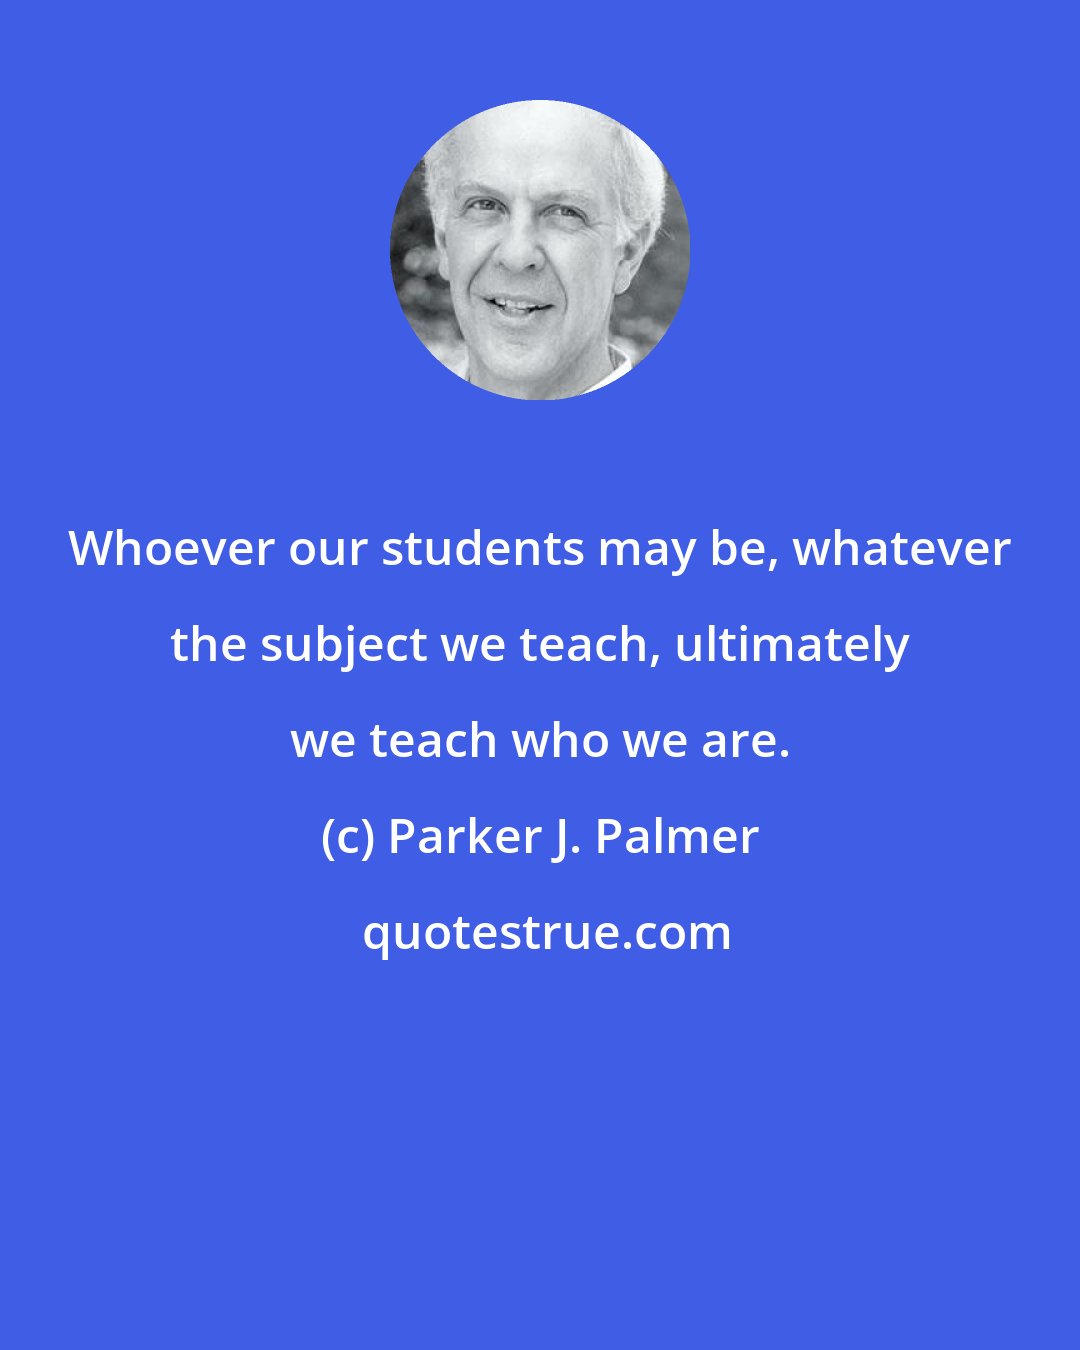 Parker J. Palmer: Whoever our students may be, whatever the subject we teach, ultimately we teach who we are.